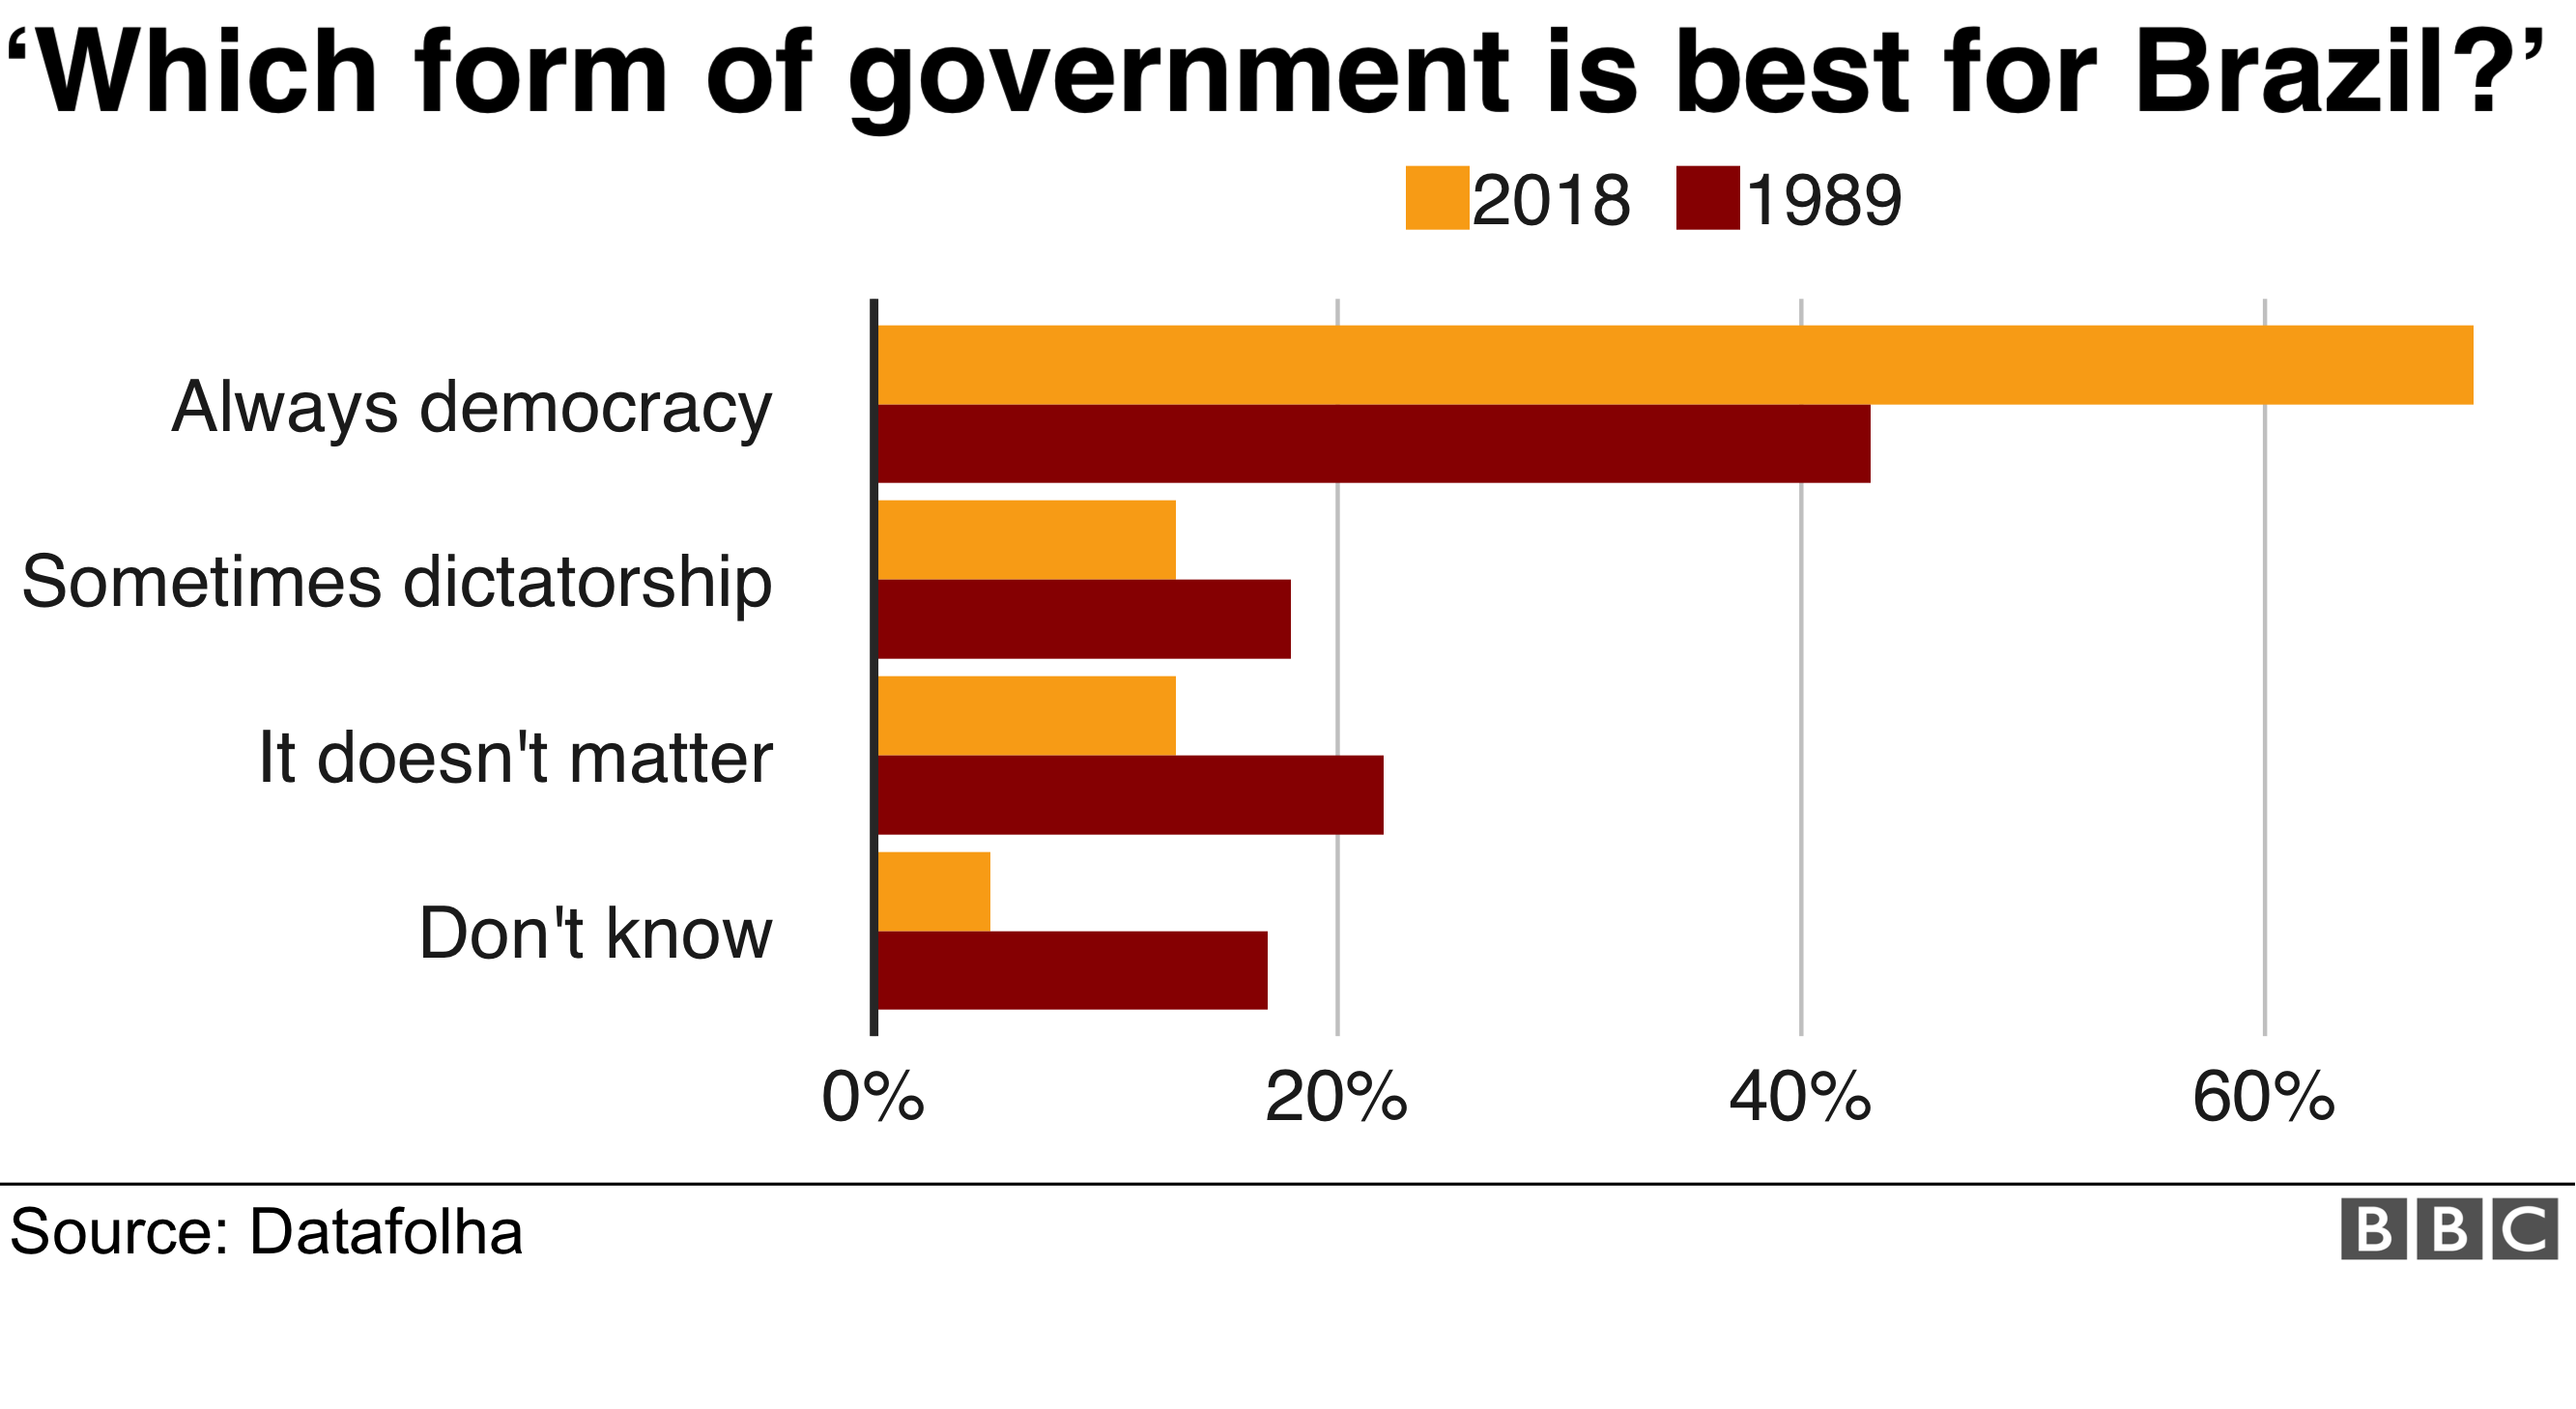 Graphs shows 69% of people believe democracy is always the best way to form a government